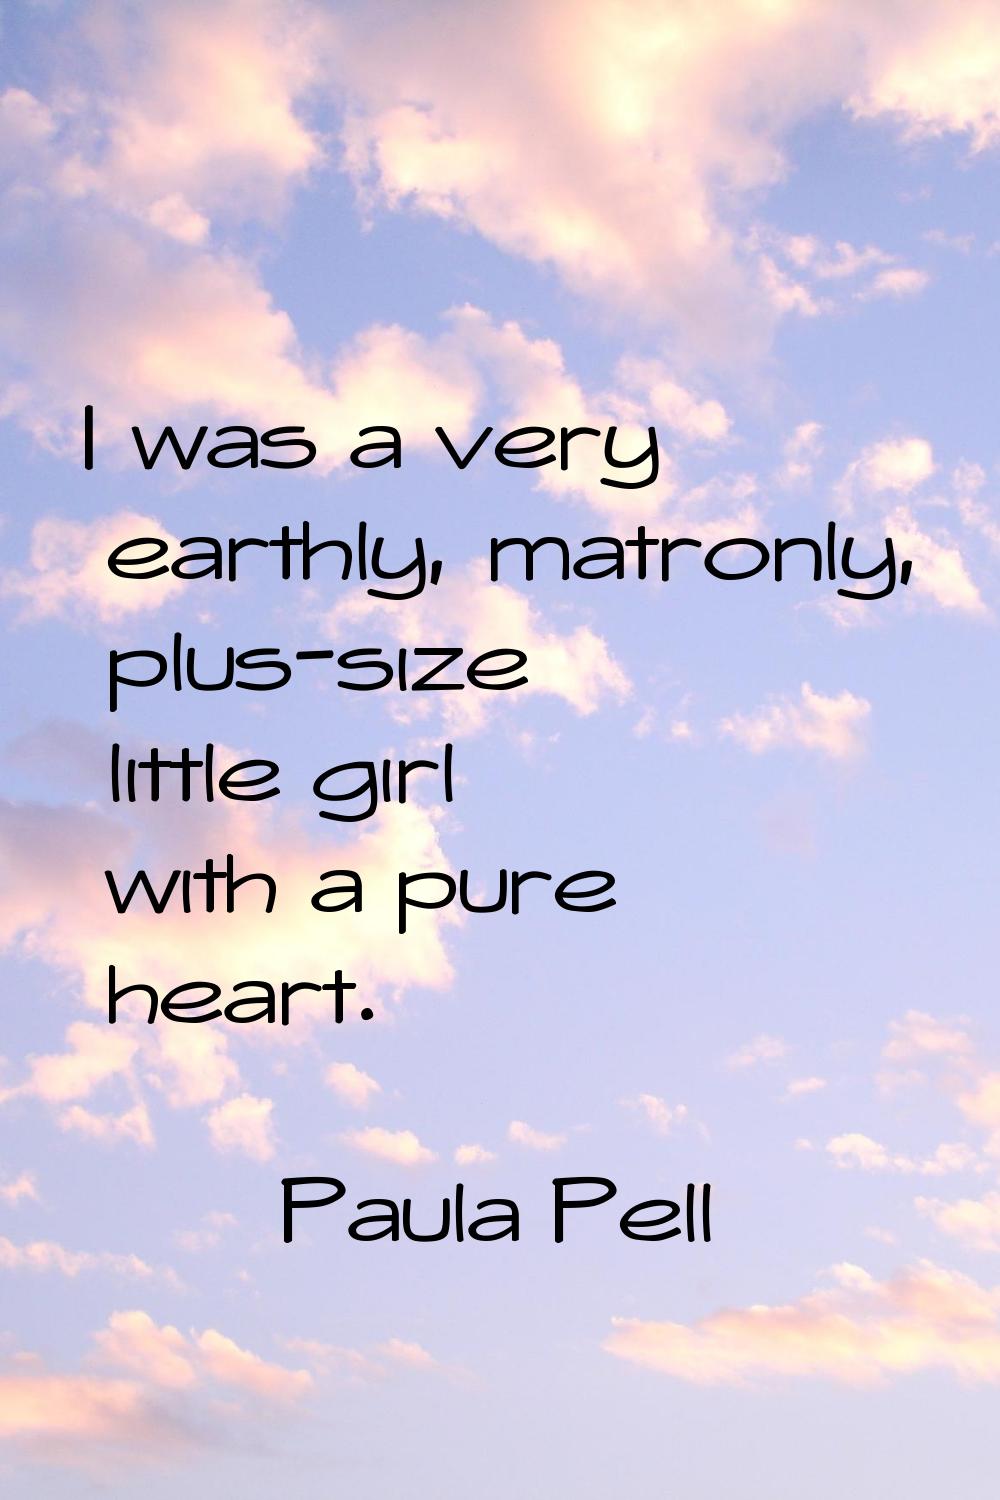 I was a very earthly, matronly, plus-size little girl with a pure heart.